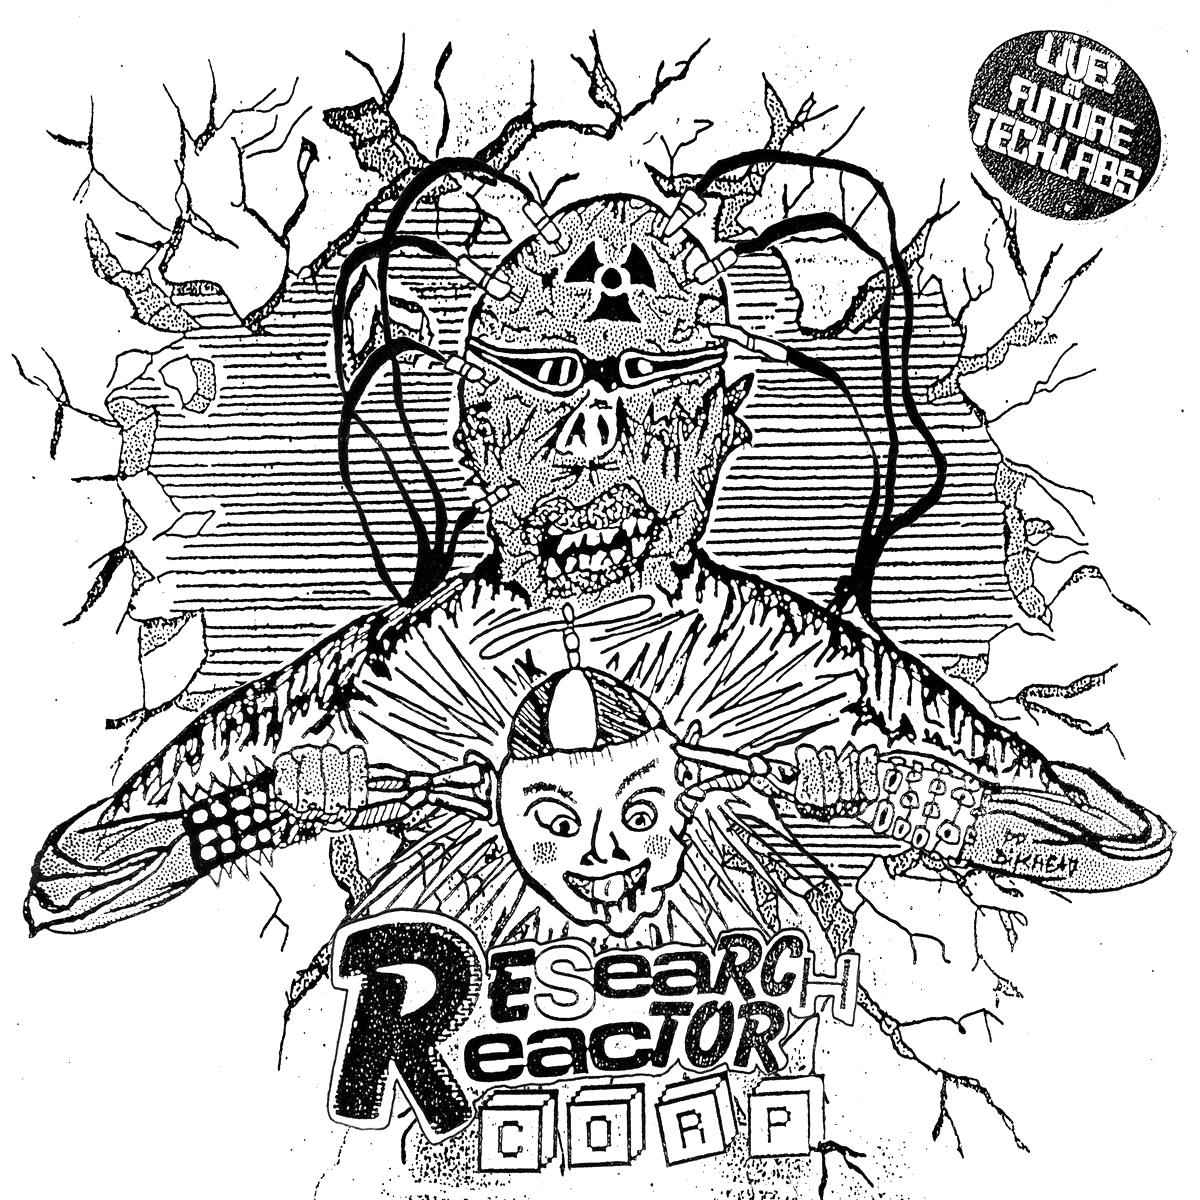 Research Reactor Corp-Live at Future Techlabs LP ~KILLER!